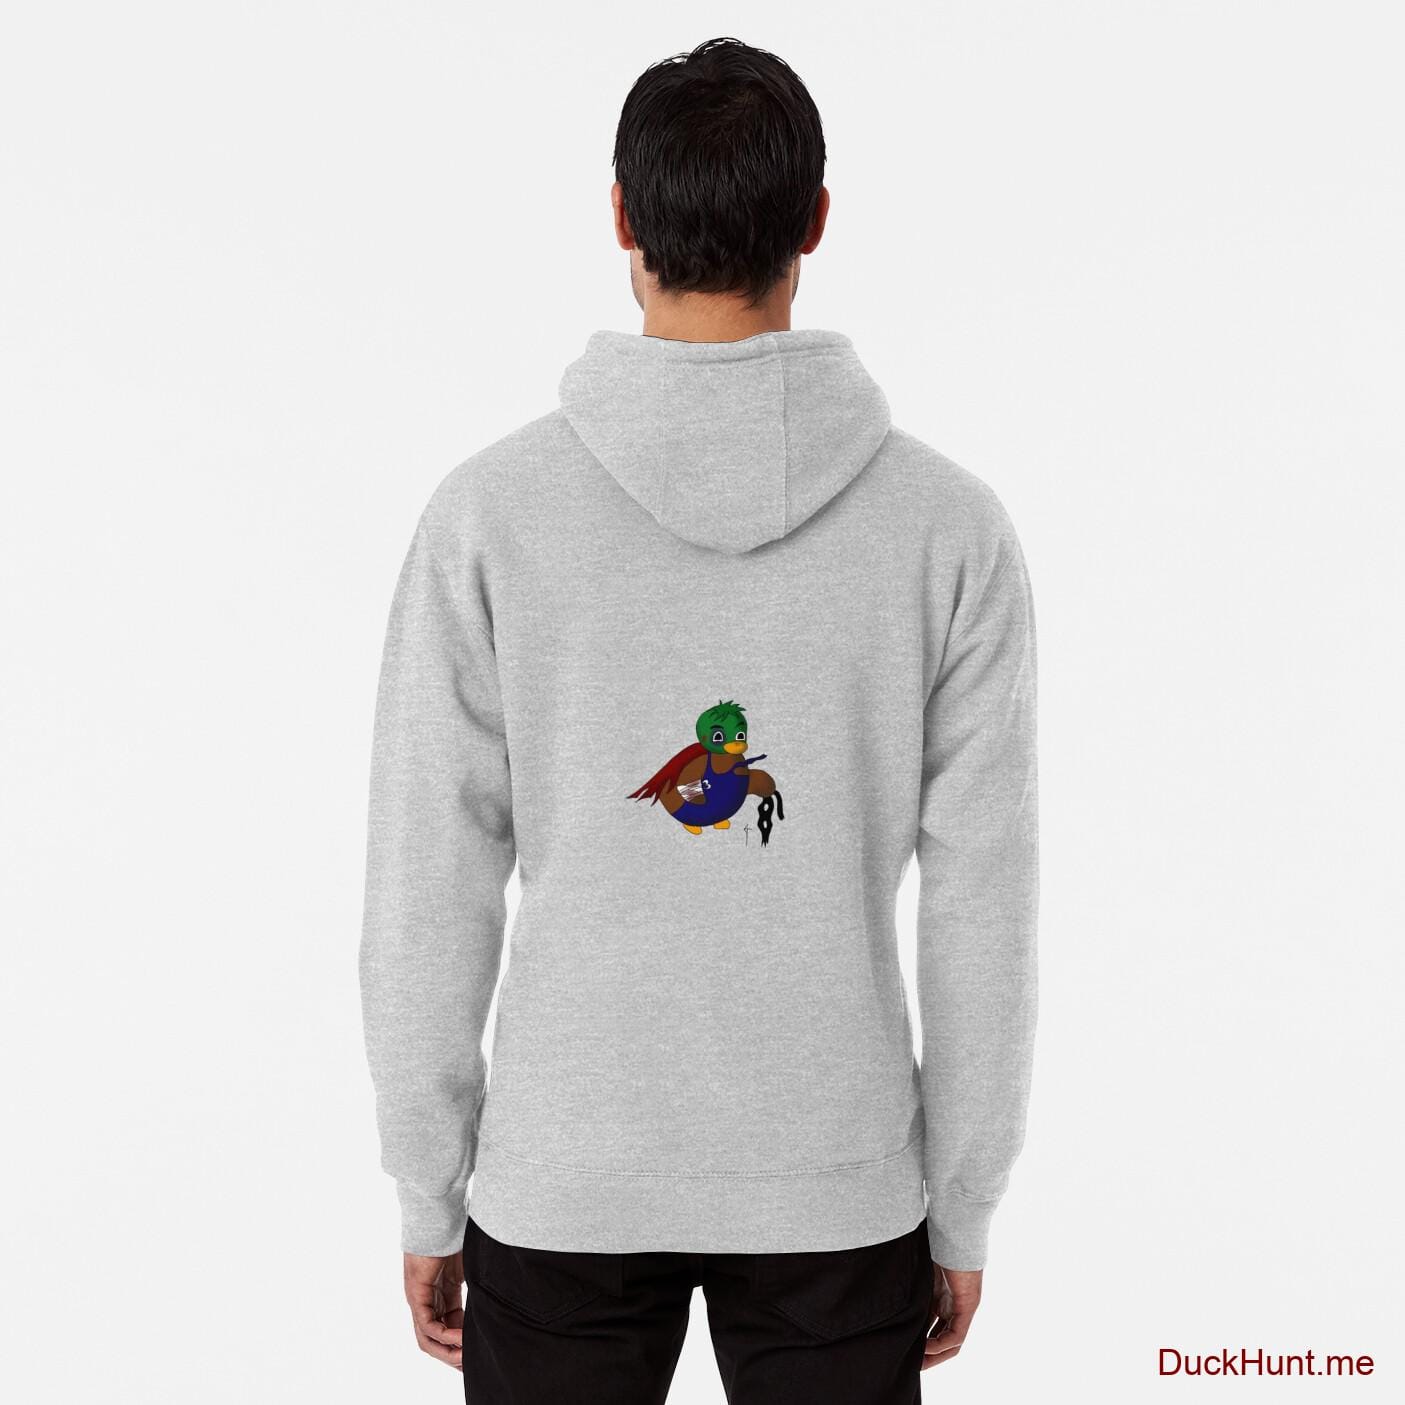 Dead DuckHunt Boss (smokeless) Heather Grey Pullover Hoodie (Back printed)